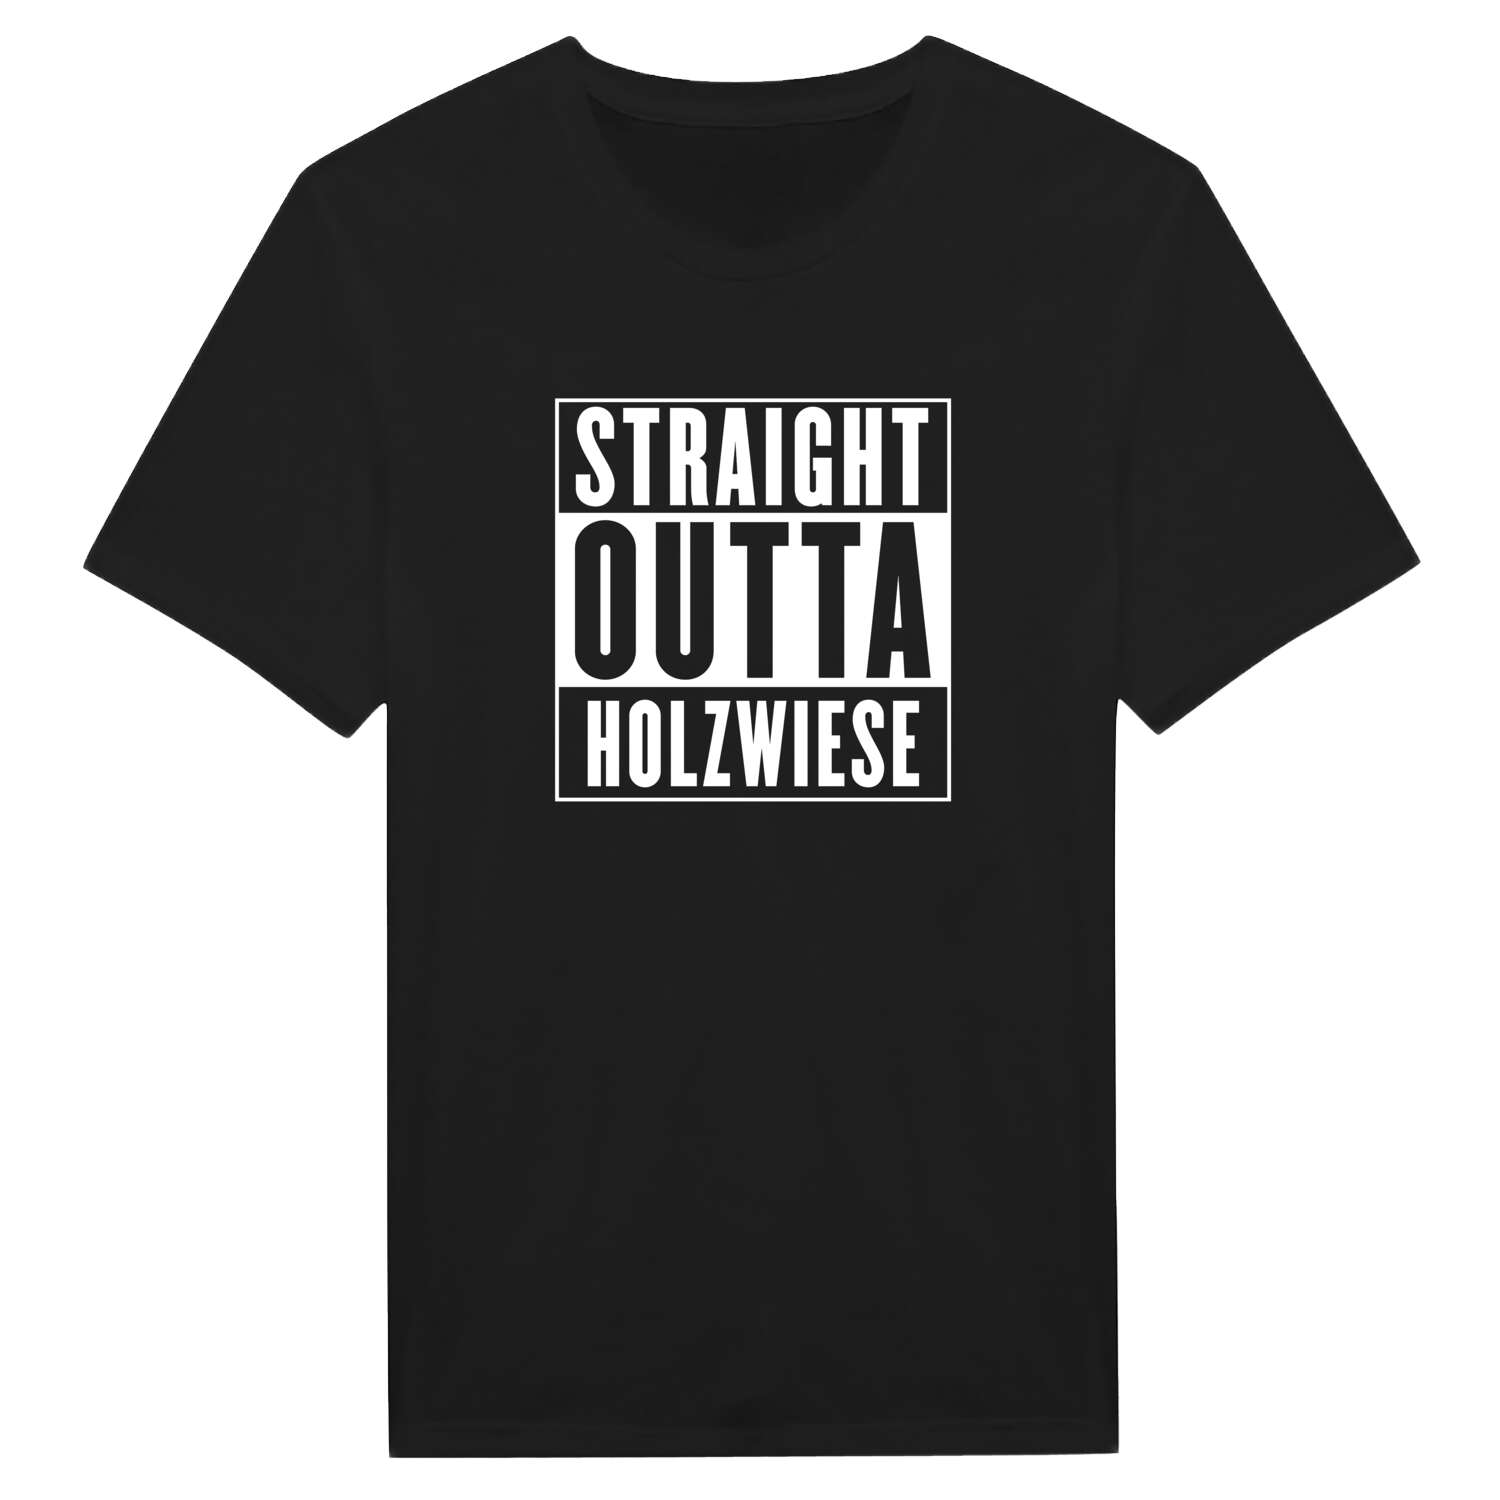 Holzwiese T-Shirt »Straight Outta«